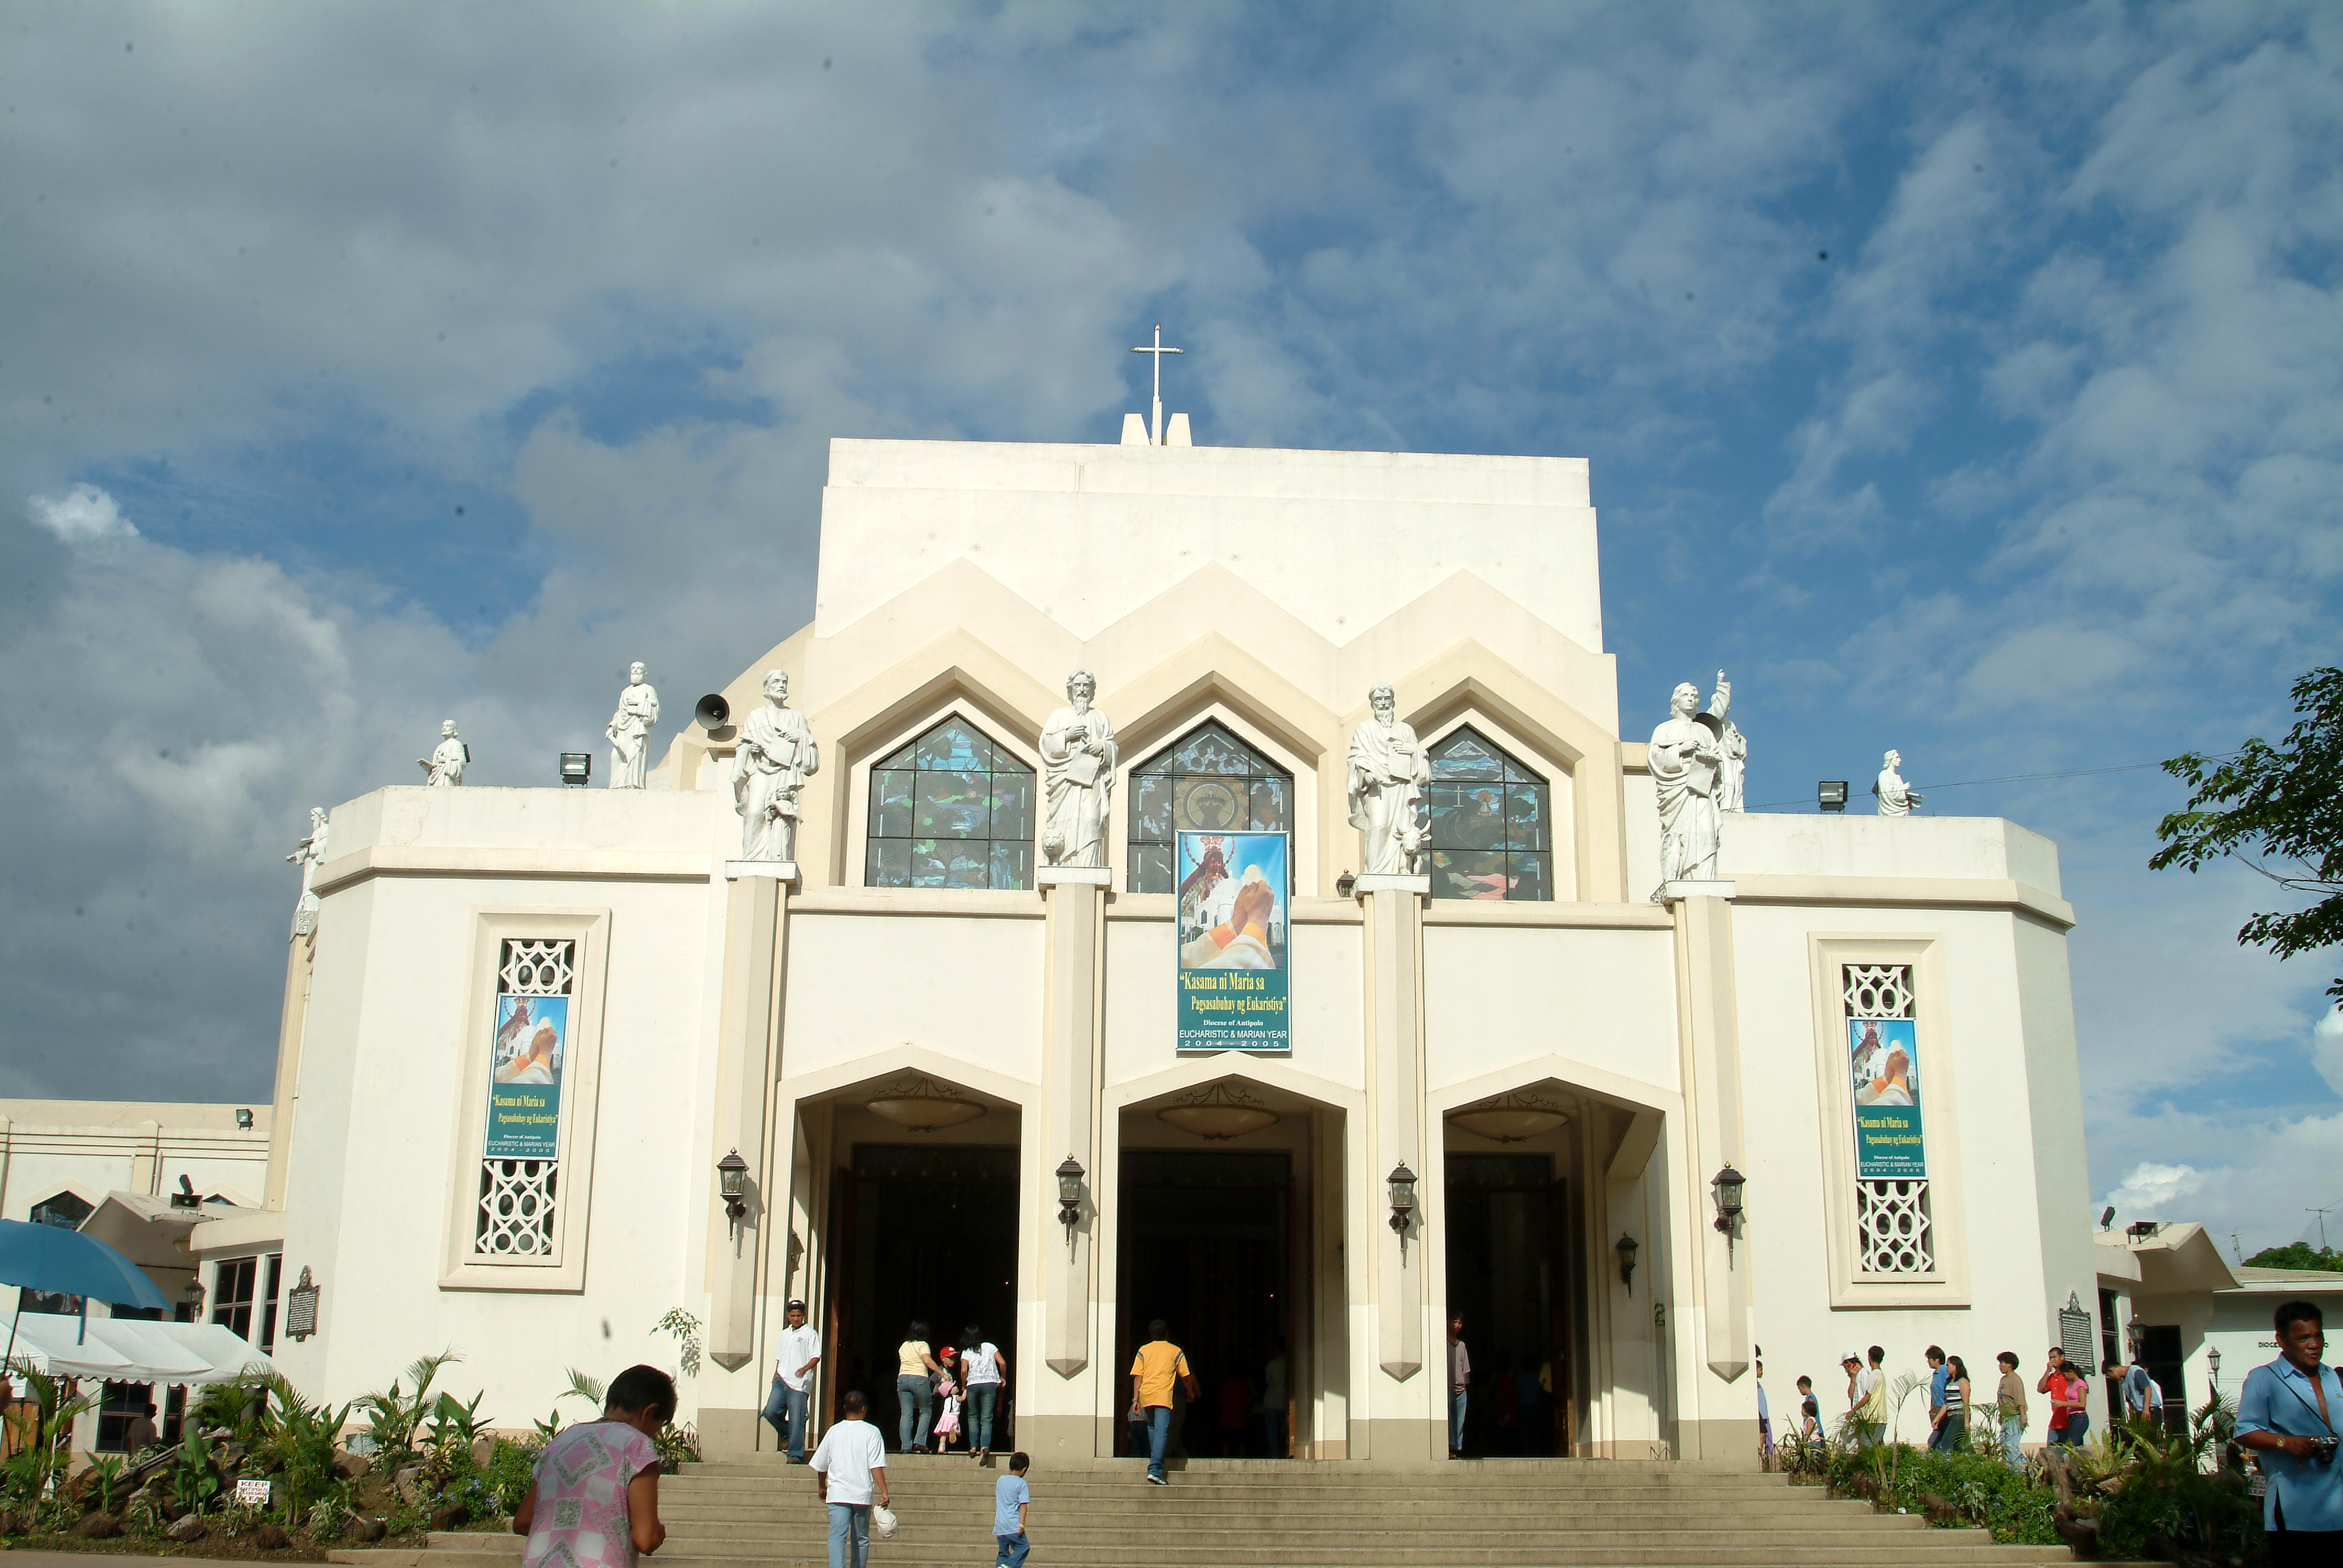 Antipolo Cathedral  Image source: antipolo.ph